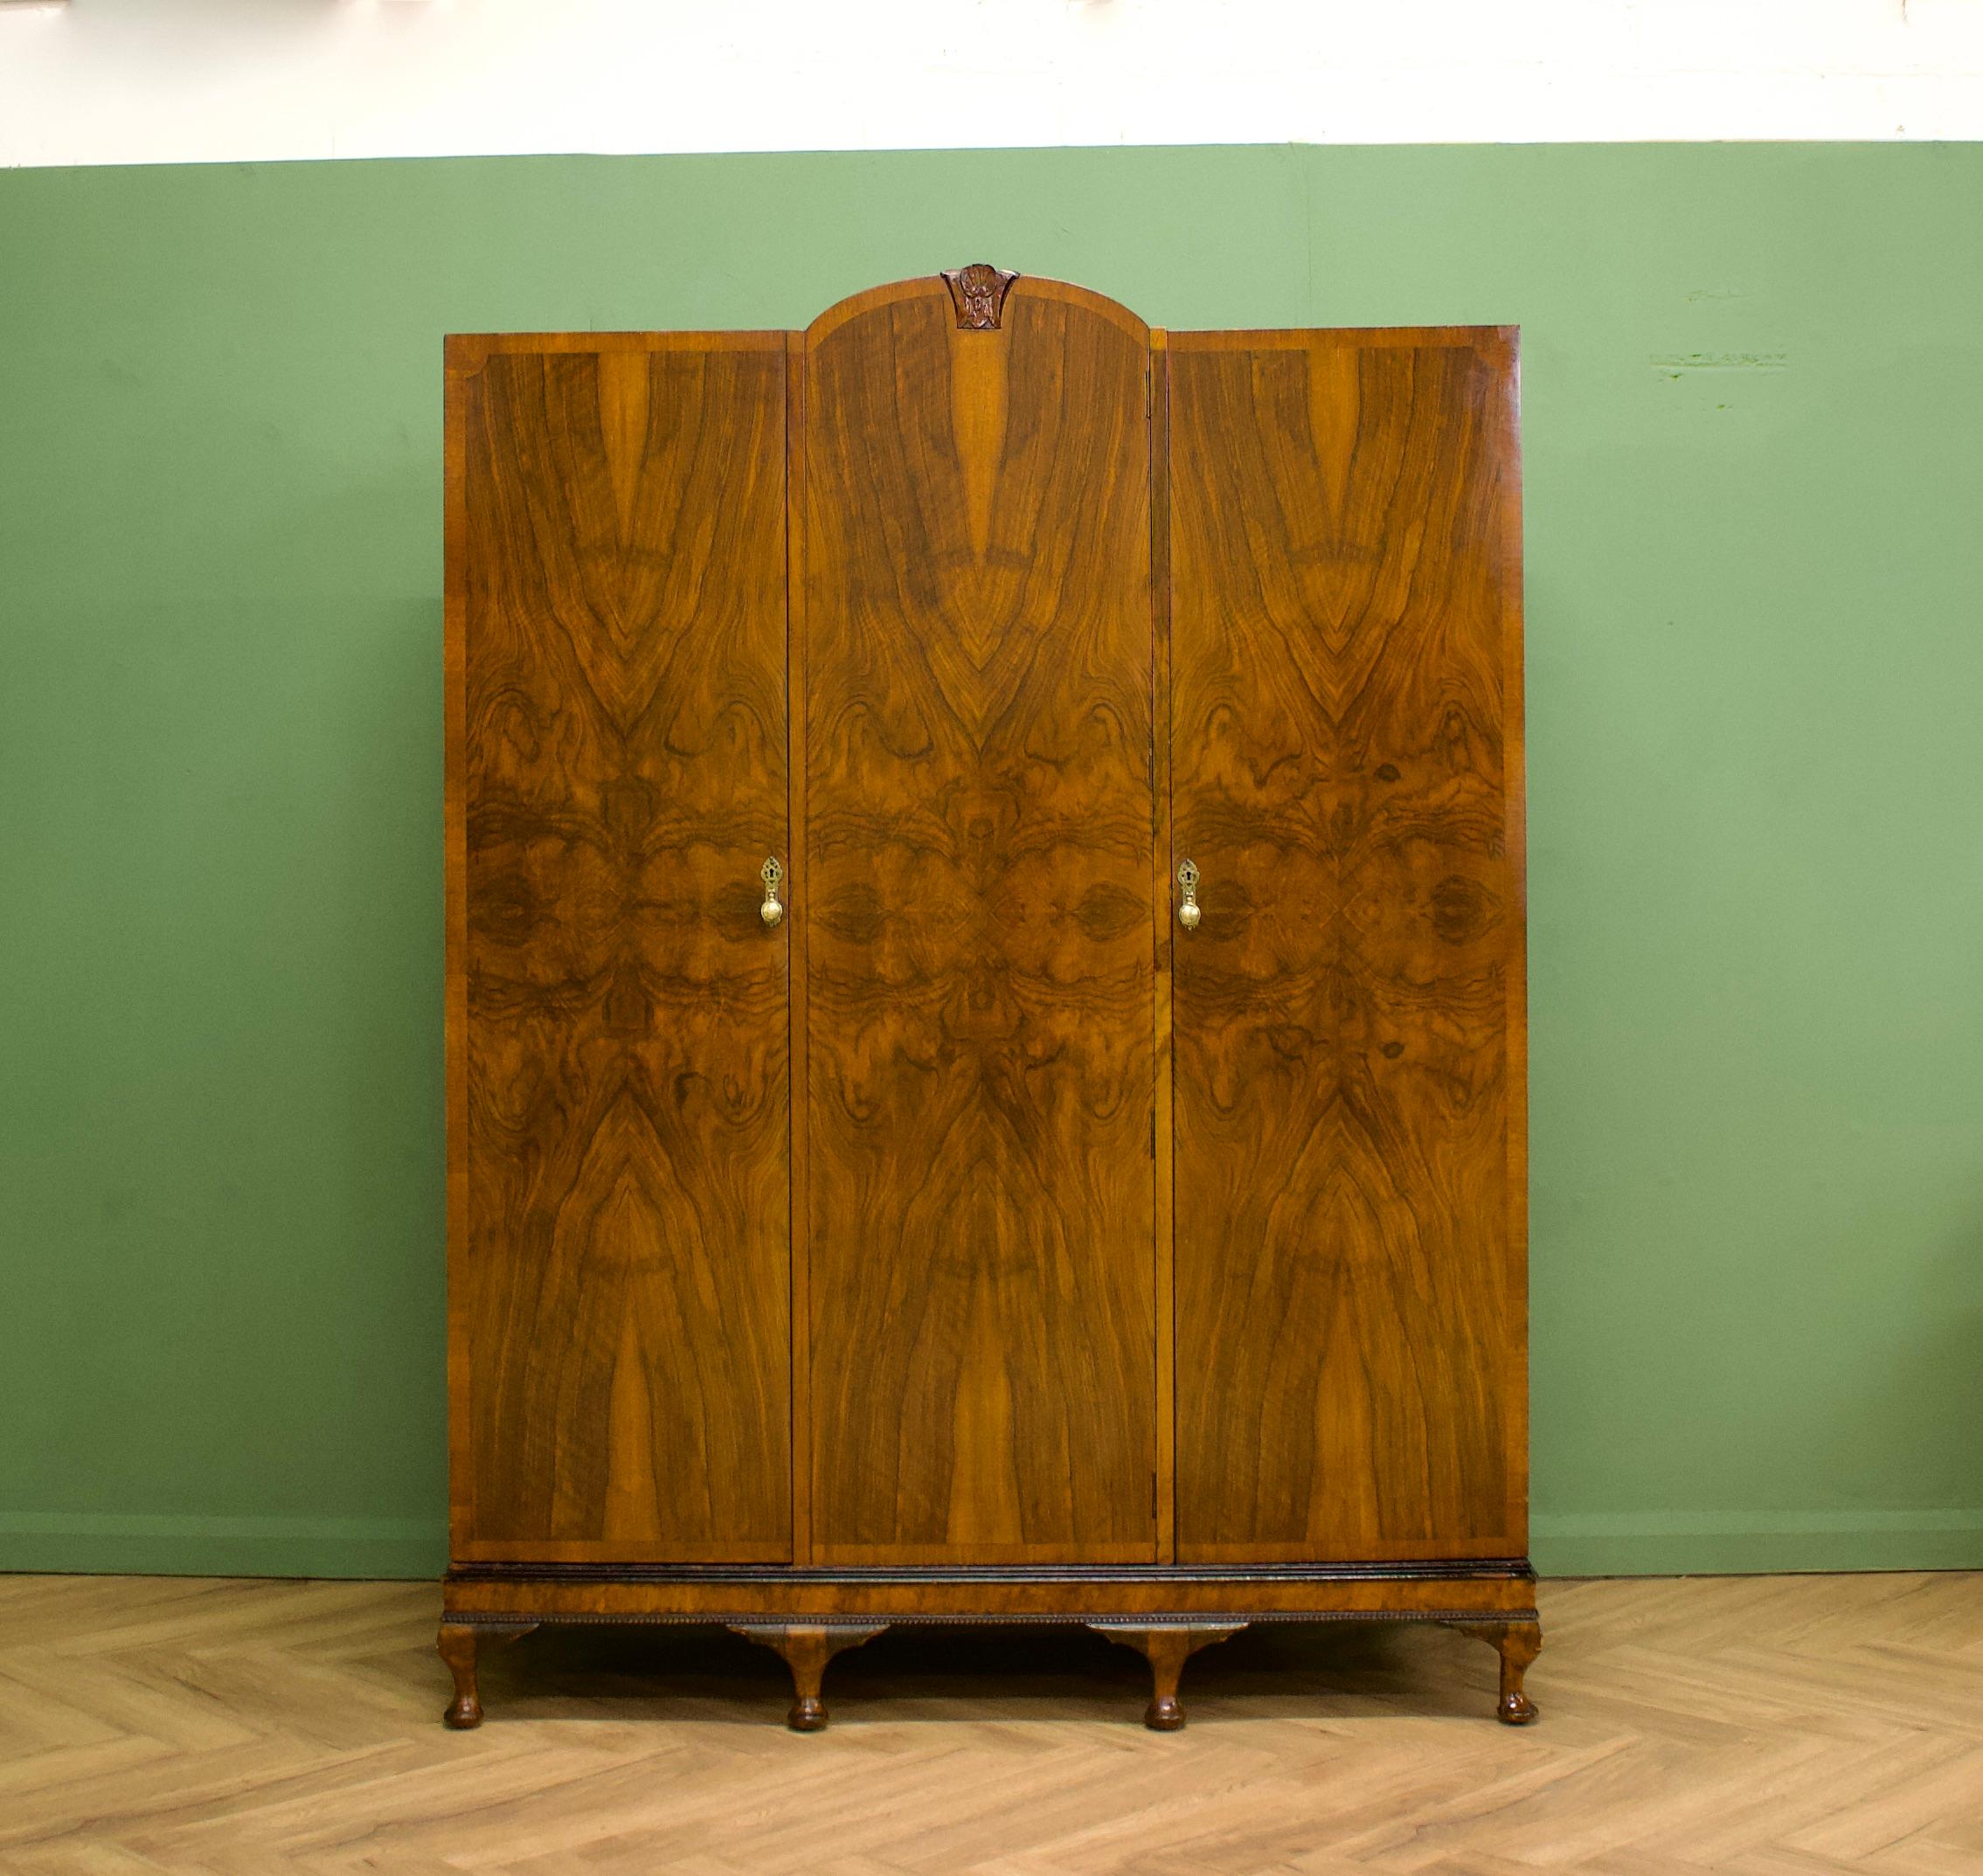 An impressive quality, 1930's burr walnut triple door wardrobe - perfect for a maximalist interior
The intense walnut veneers have been beautifully quarter matched on the doors 
This piece is Art Deco in style, with influences of Art Nouveau -